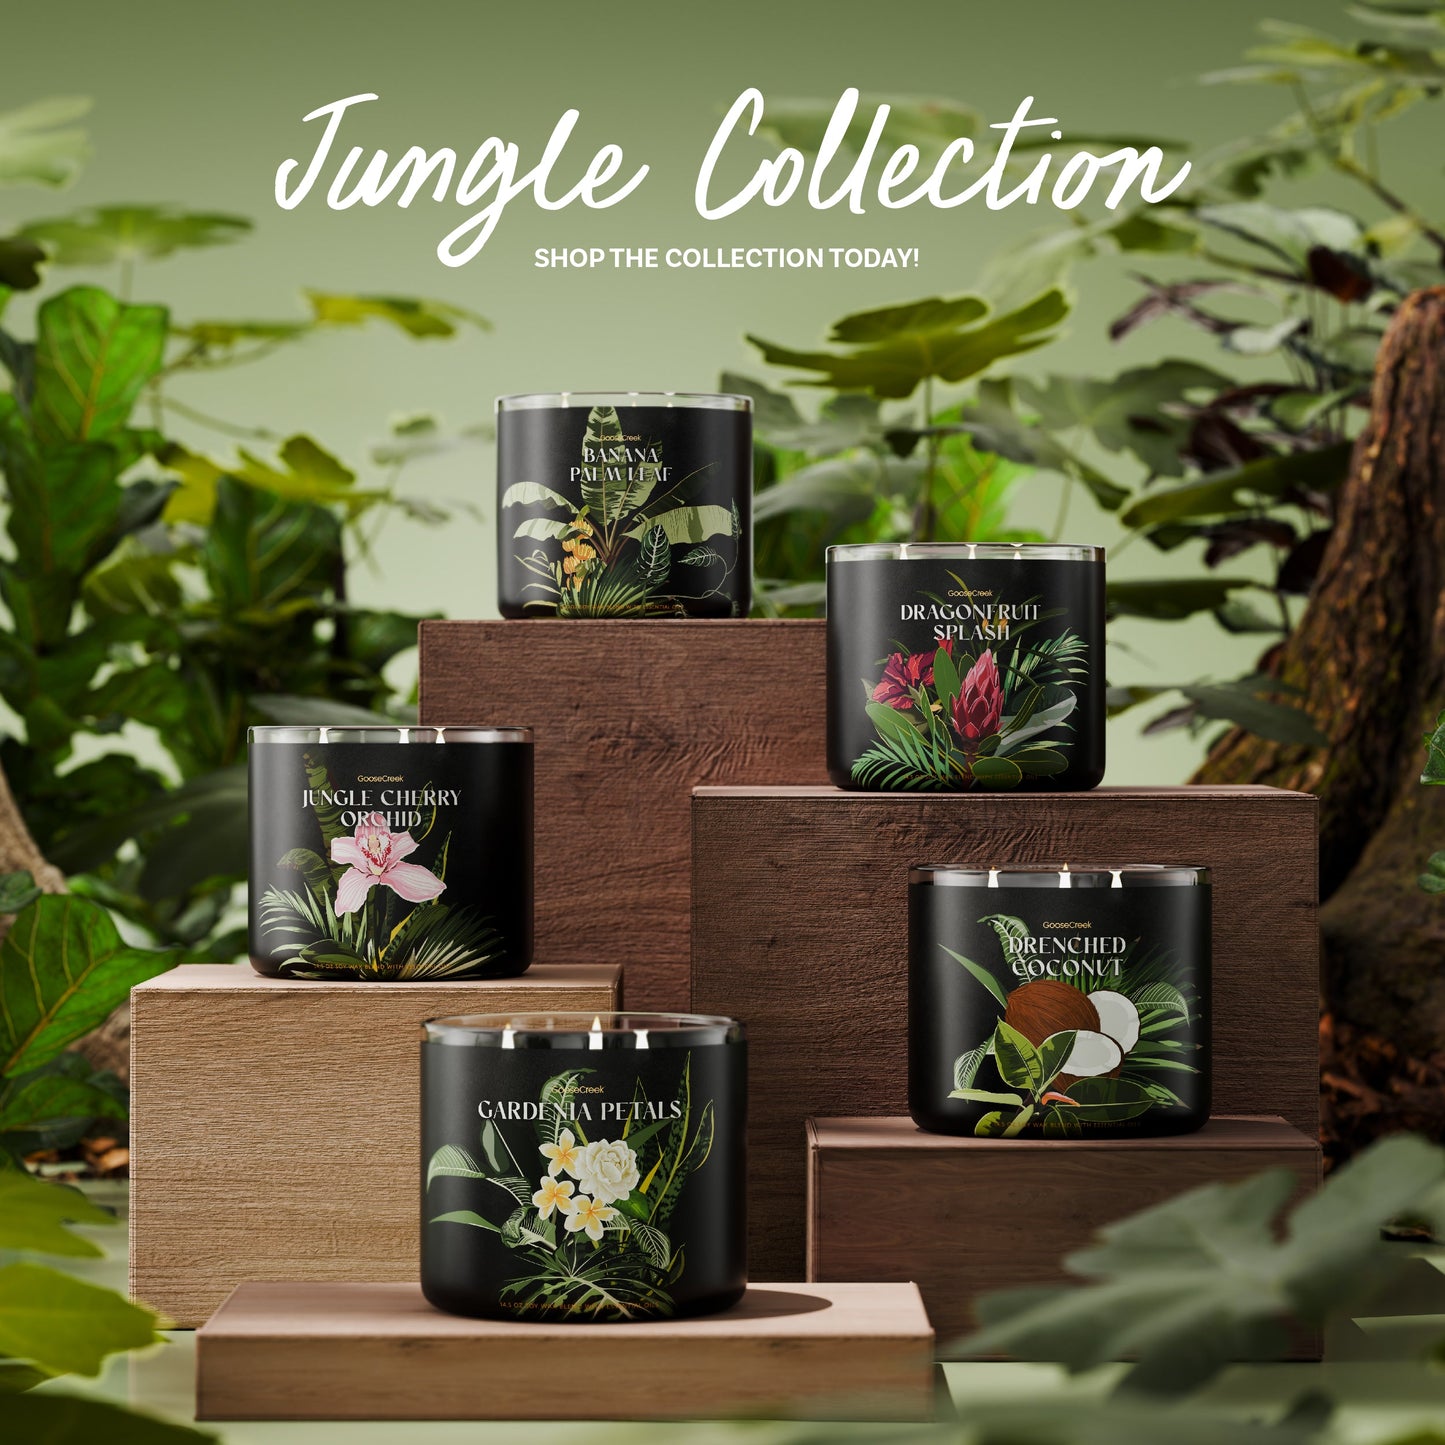 Jungle Cherry Orchid Large 3-Wick Candle